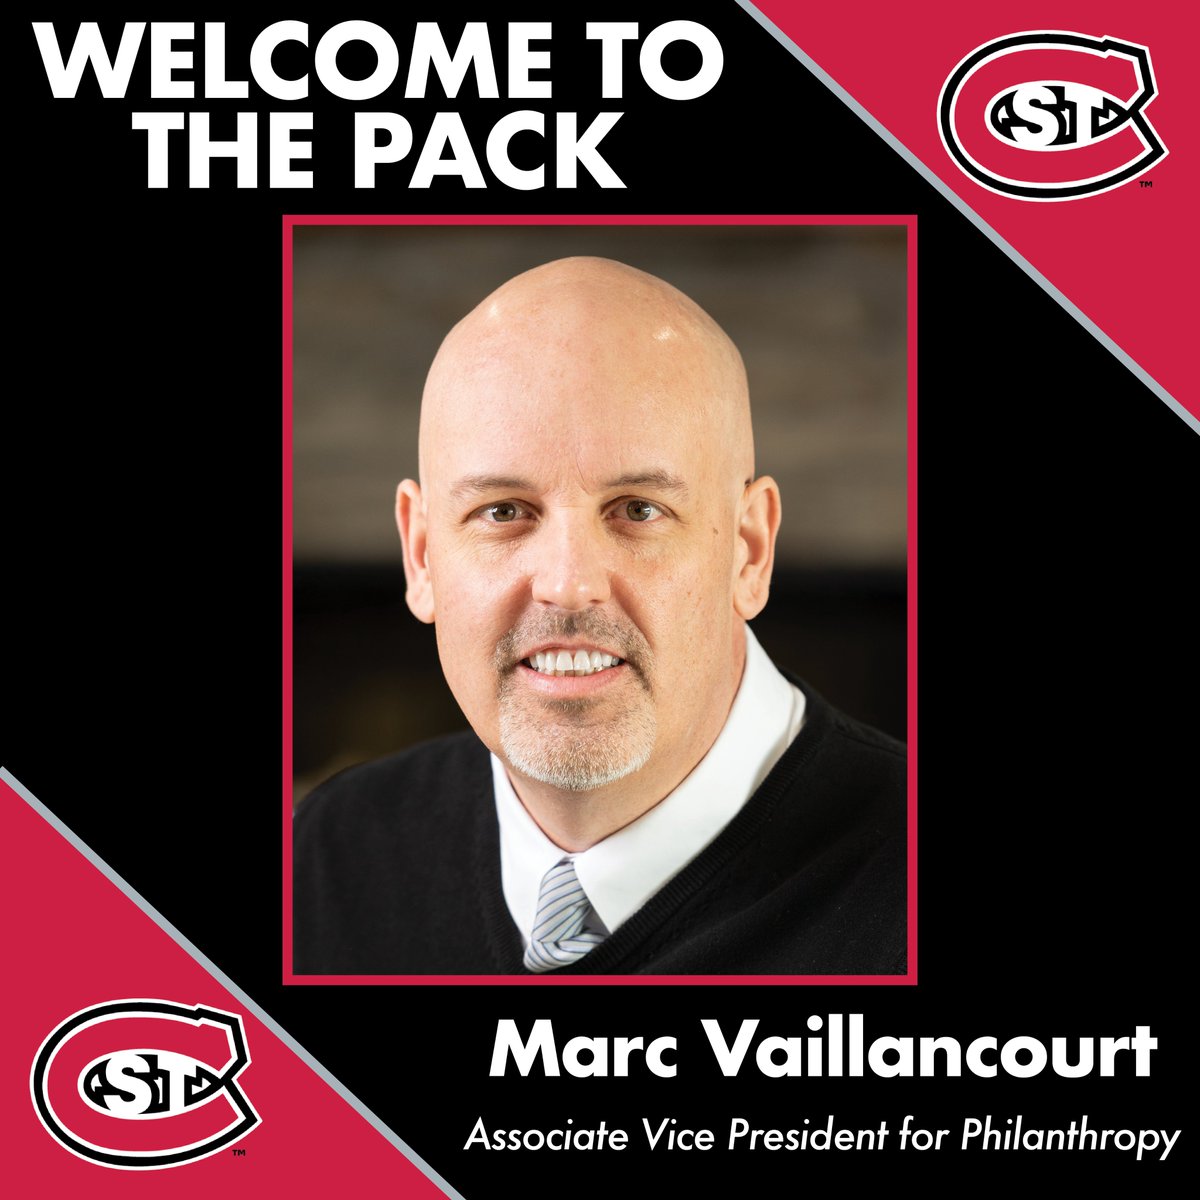 Welcome to the Pack, Marc Vaillancourt! He has joined @stcloudstate as Associate VP of Philanthropy, and will partner with VP for Advancement & Alumni Engagement Nic Katona to provide leadership, direction and management for philanthropy initiatives. scsu.mn/3WfYueO